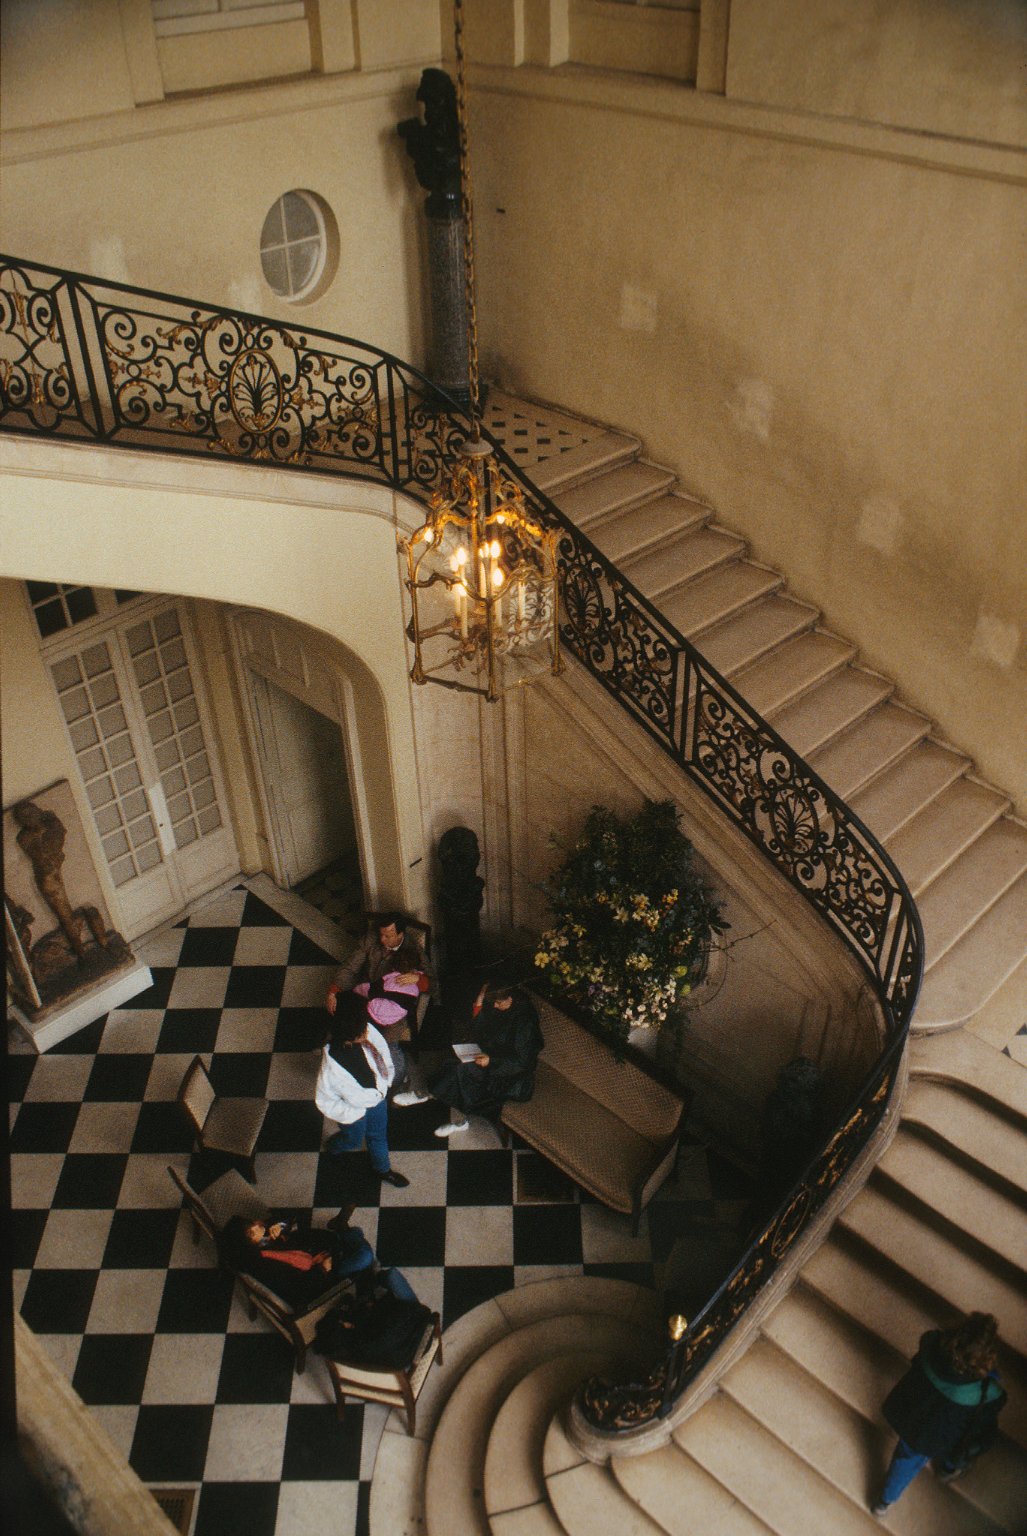 Musée Rodin - interior : staircase